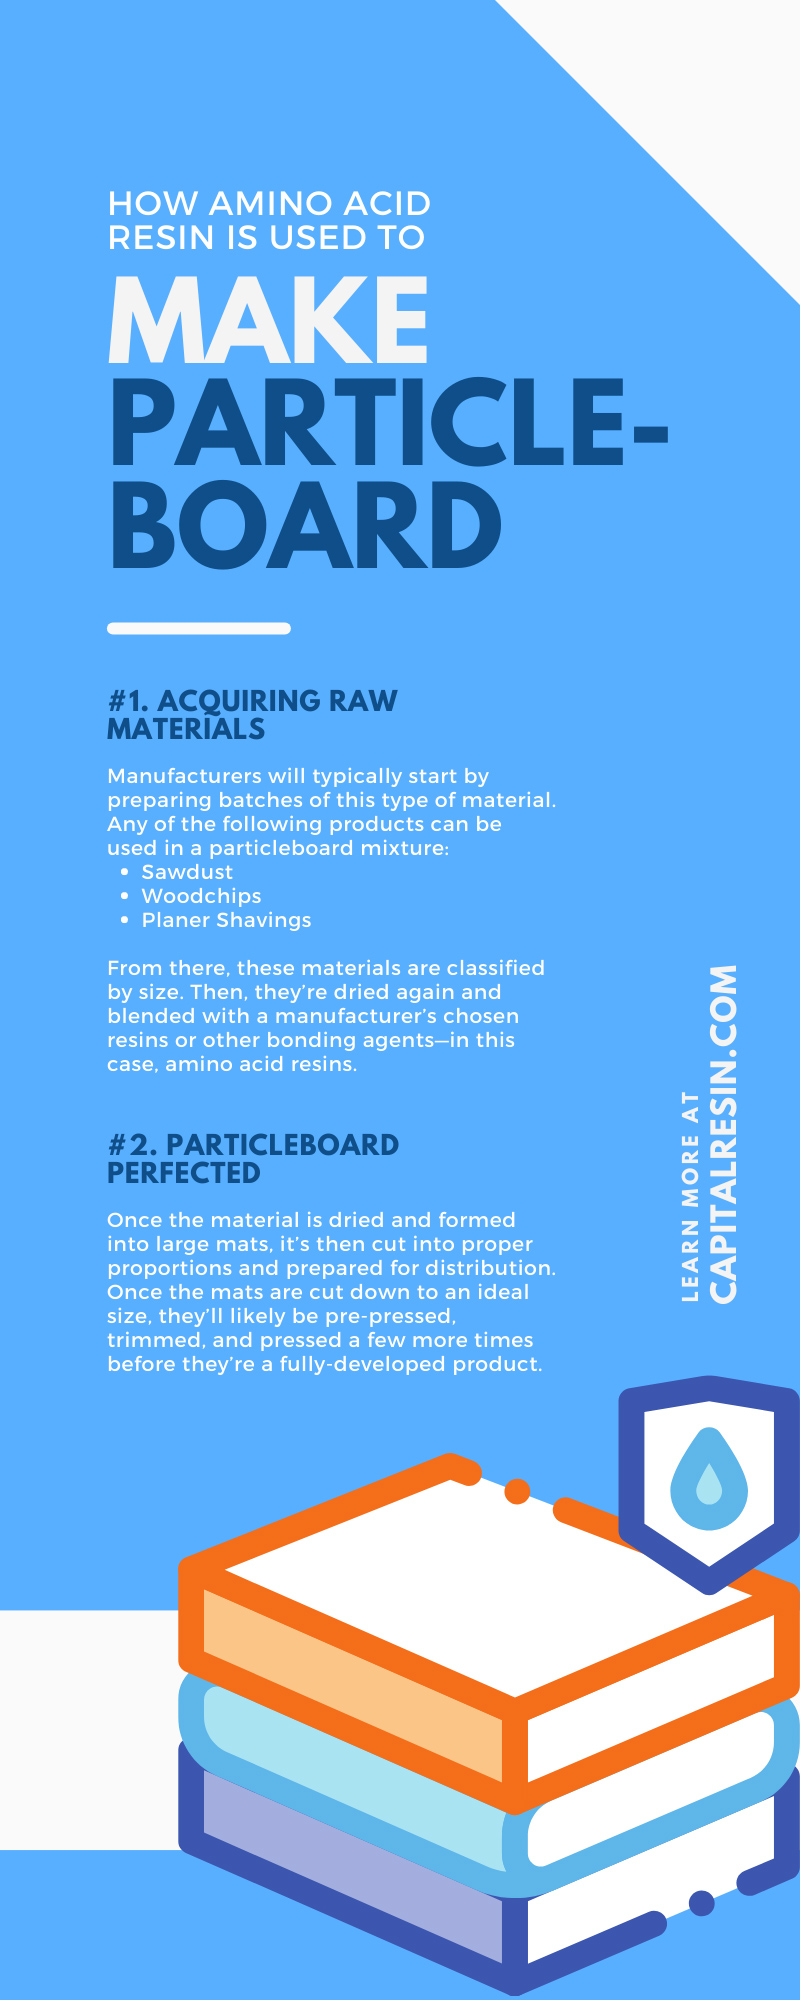 How Amino Acid Resin Is Used To Make Particleboard